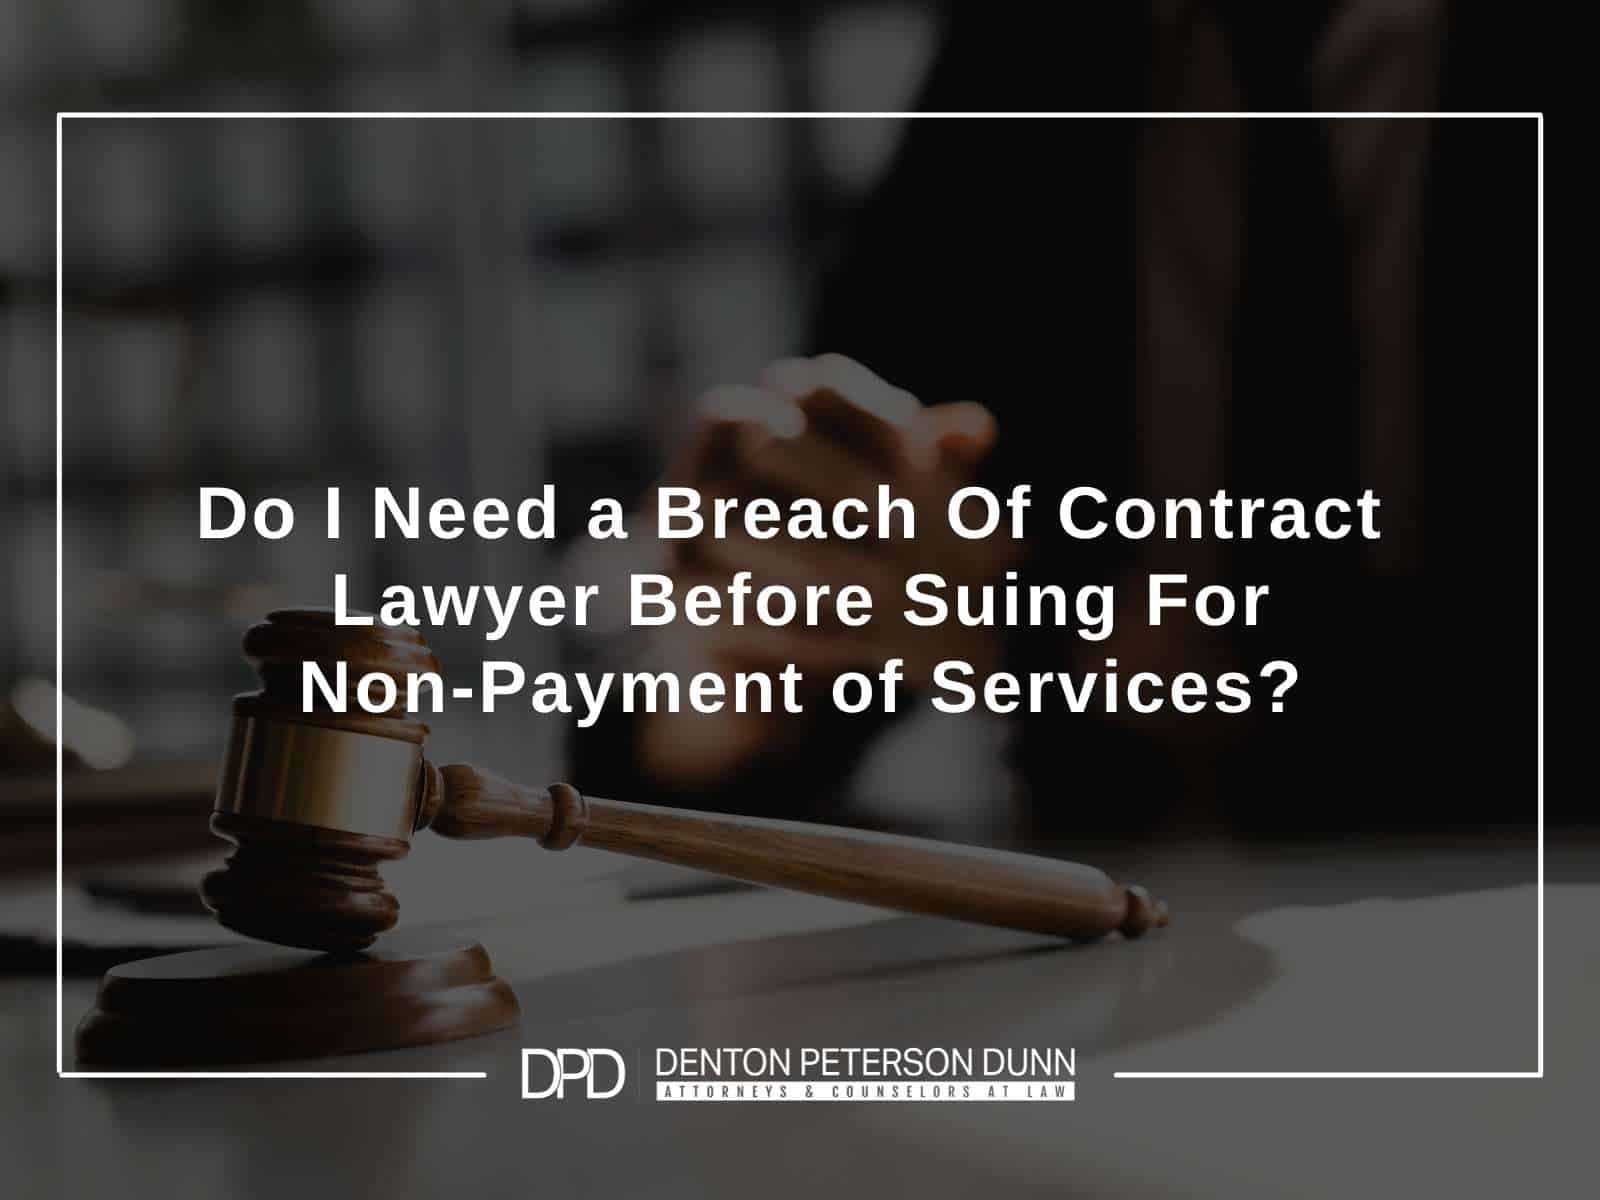 Hiring a Lawyer Before Suing For Non-Payment Of Services